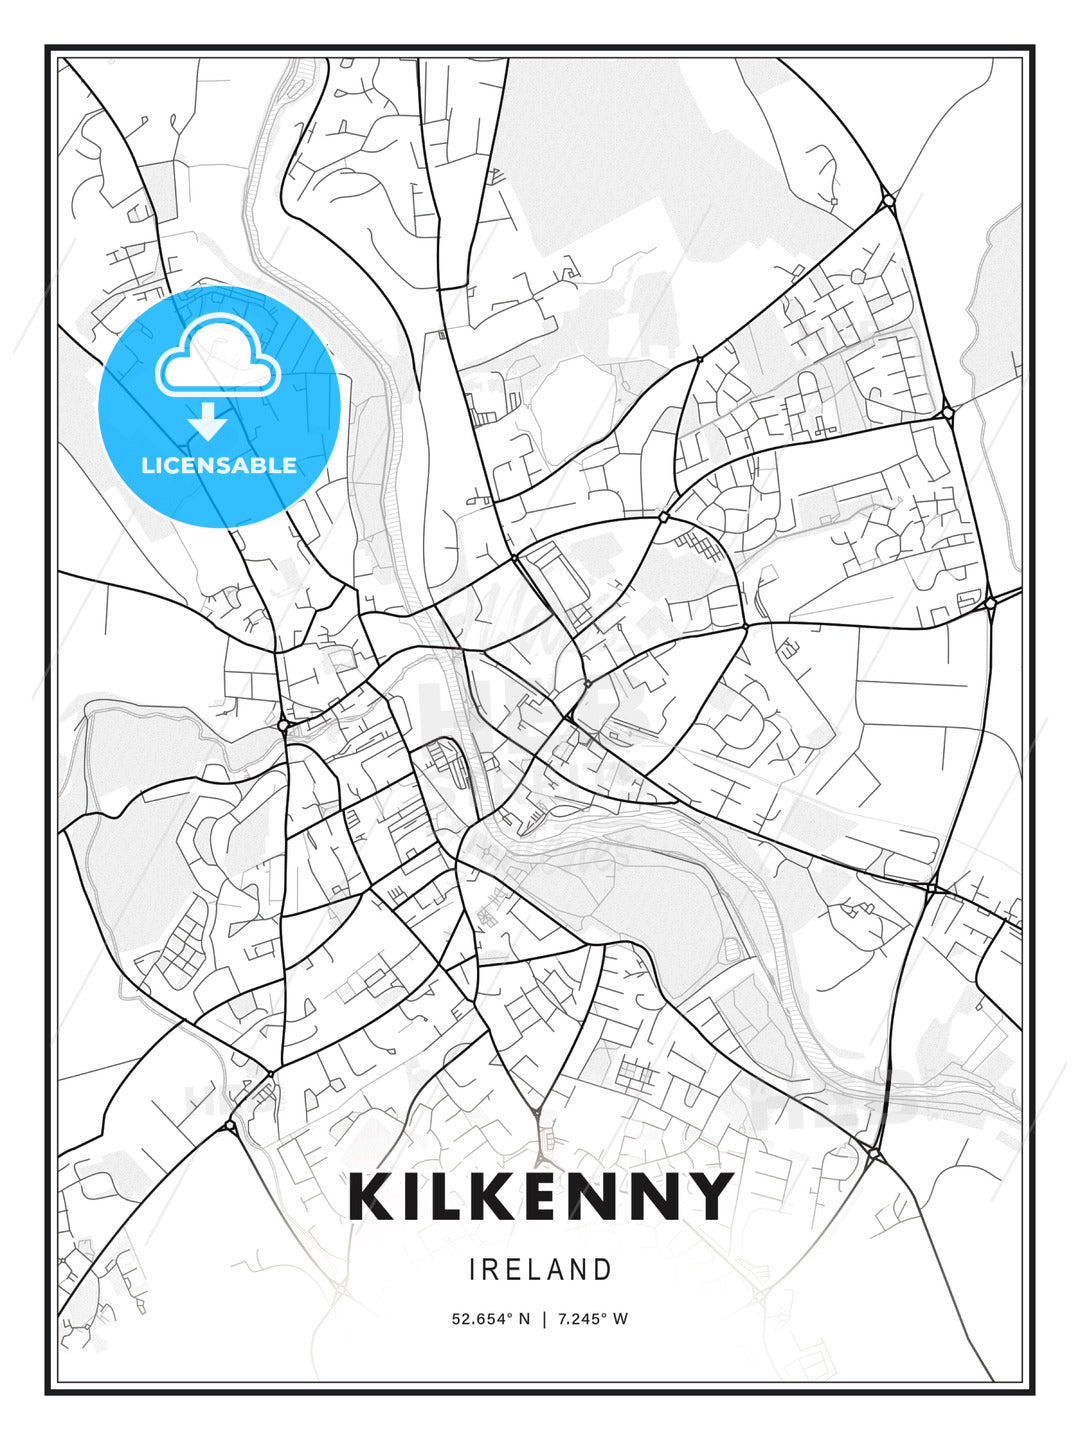 Kilkenny, Ireland, Modern Print Template in Various Formats - HEBSTREITS Sketches